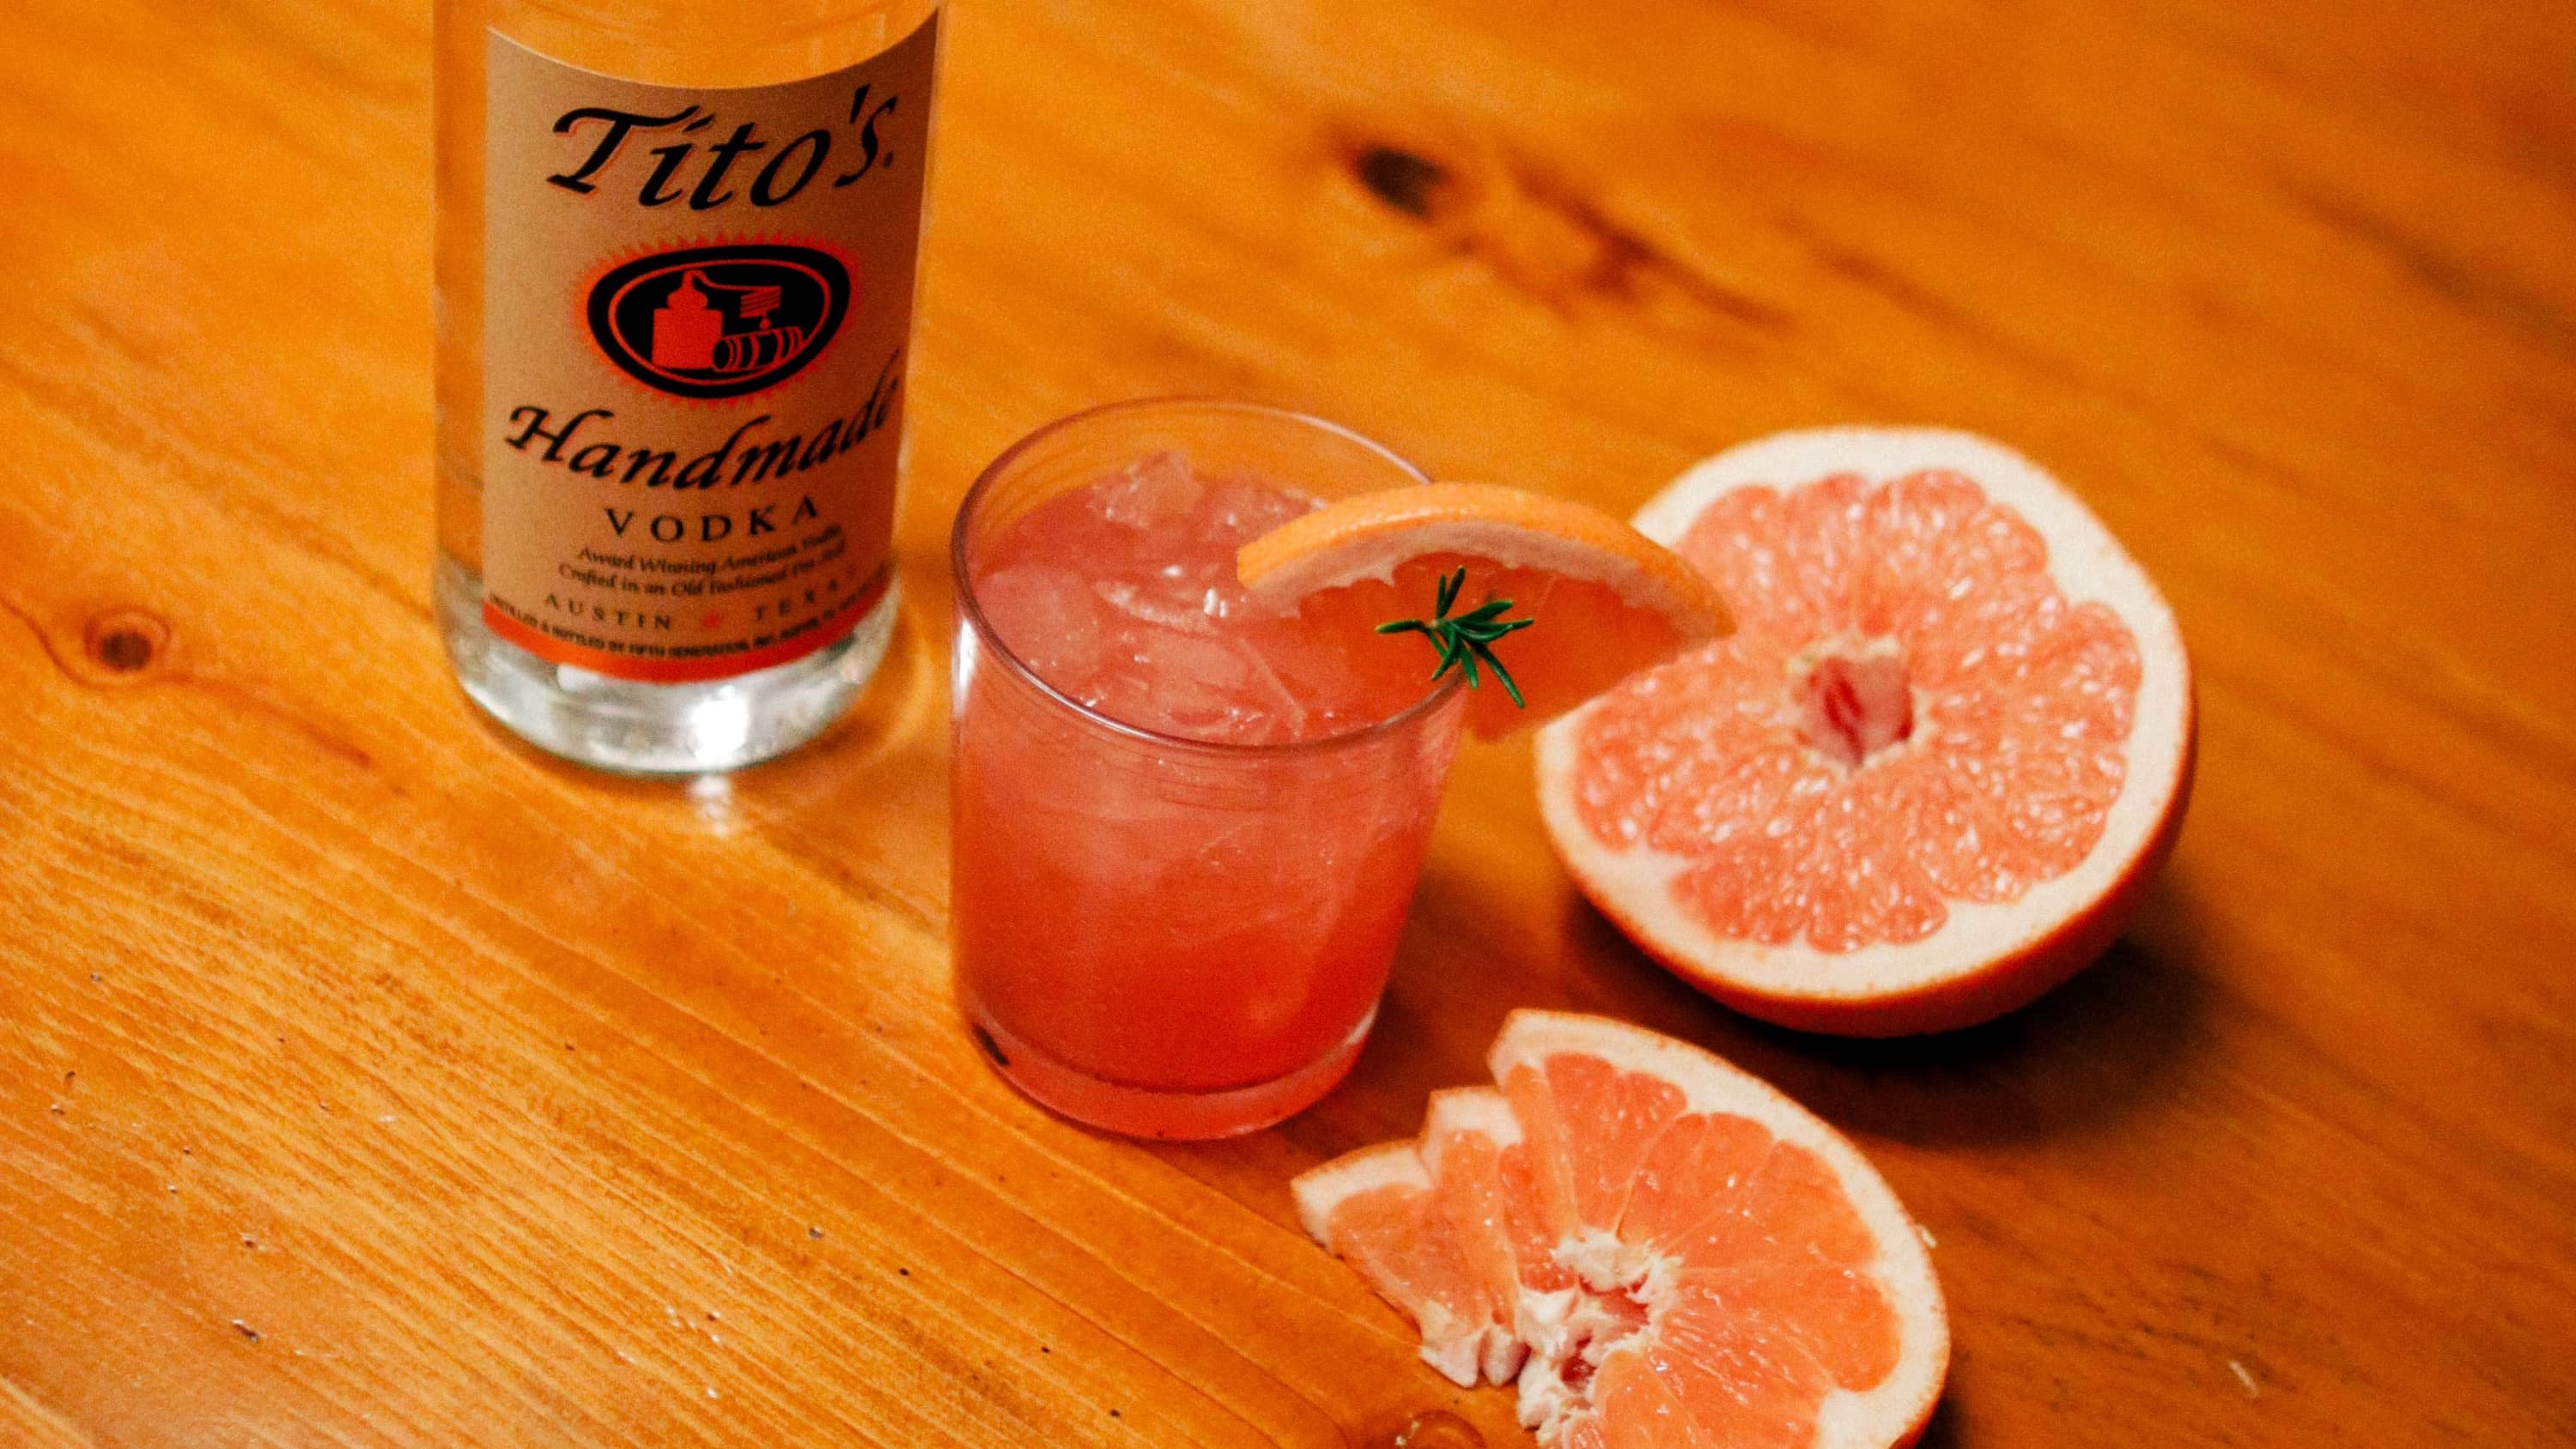 Tito's Vodka bottle next to a Tito's Greyhound garnished with a grapefruit slice